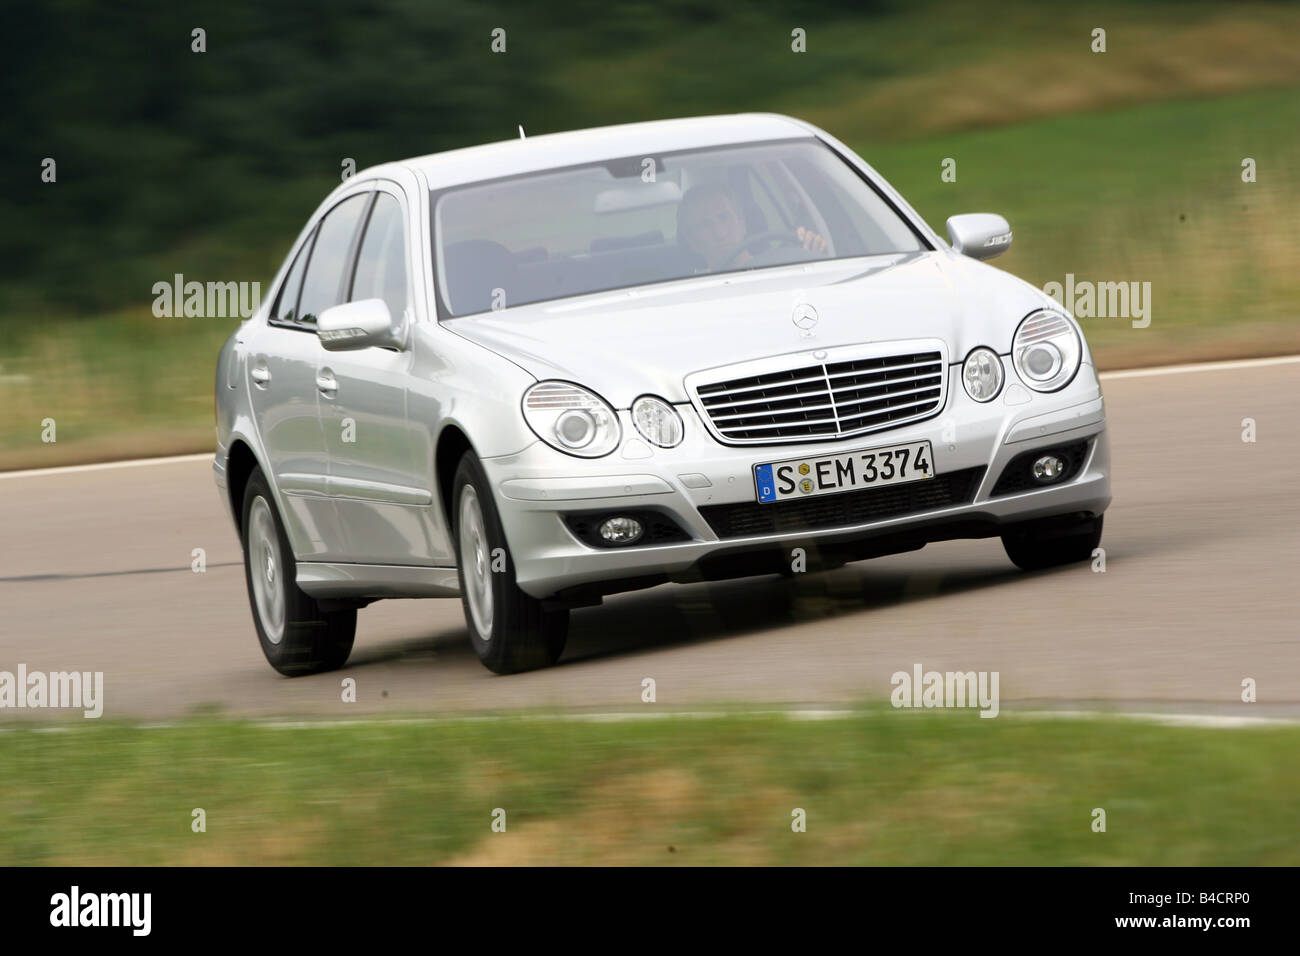 Mercedes e 220 cdi High Resolution Stock Photography and Images - Alamy